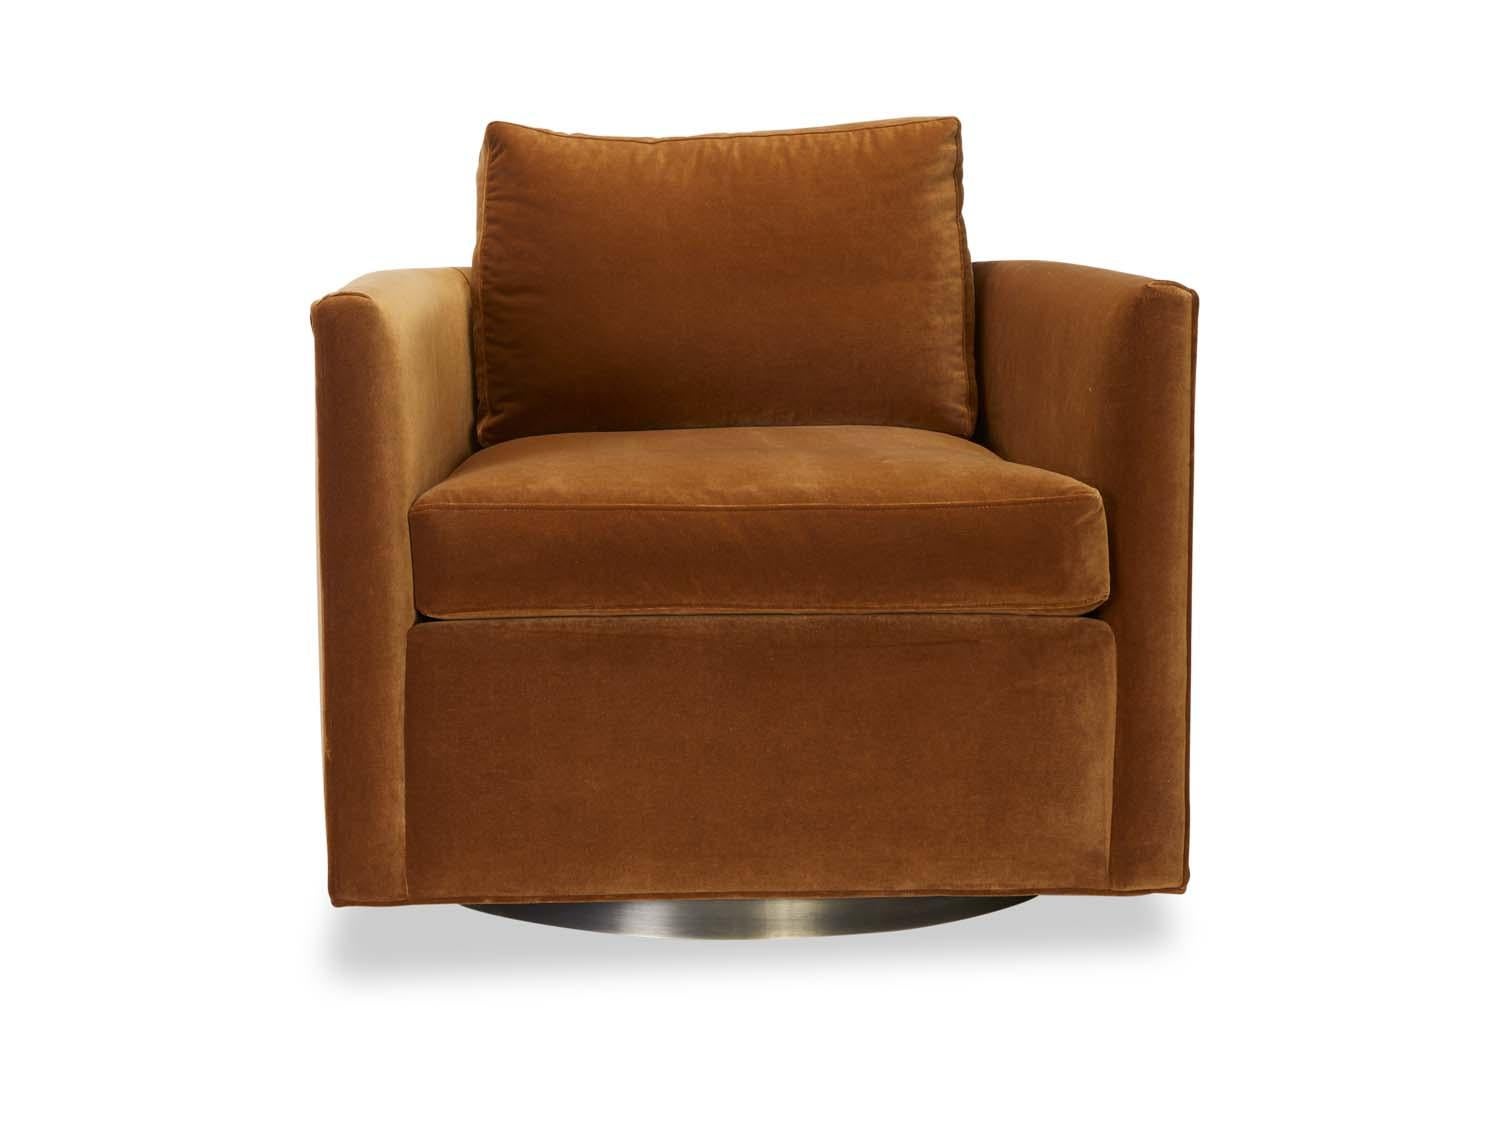 The Curved Back Swivel Chair is a tuxedo style lounge chair with curved corners and a metal base. The chair features down-wrapped, removable seat and back cushions.

The Lawson-Fenning Collection is designed and handmade in Los Angeles,